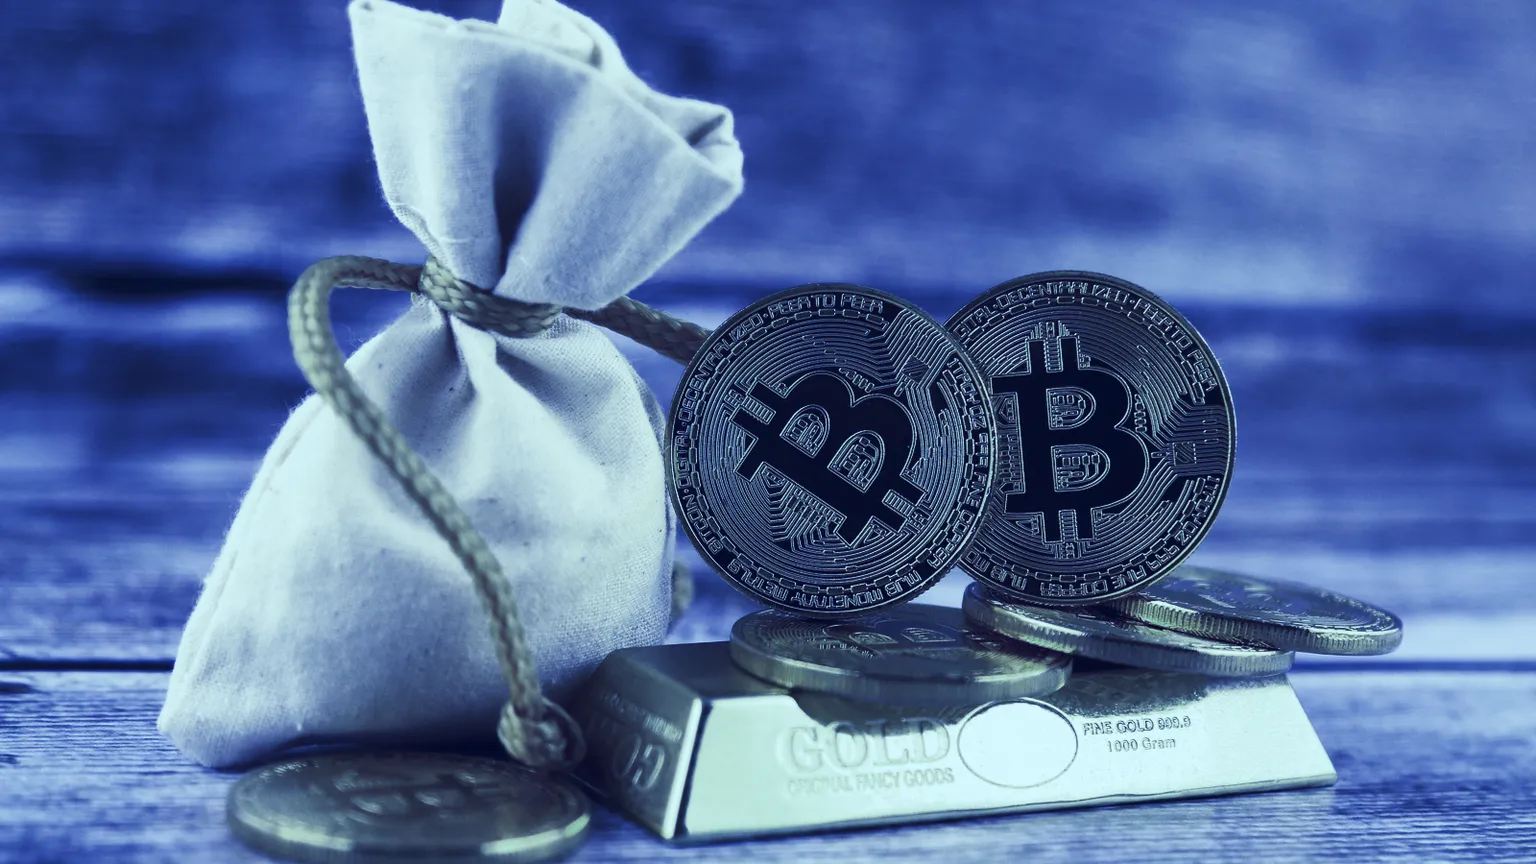 Negative rates might explain why EU investors flock to Bitcoin. Image: Shutterstock